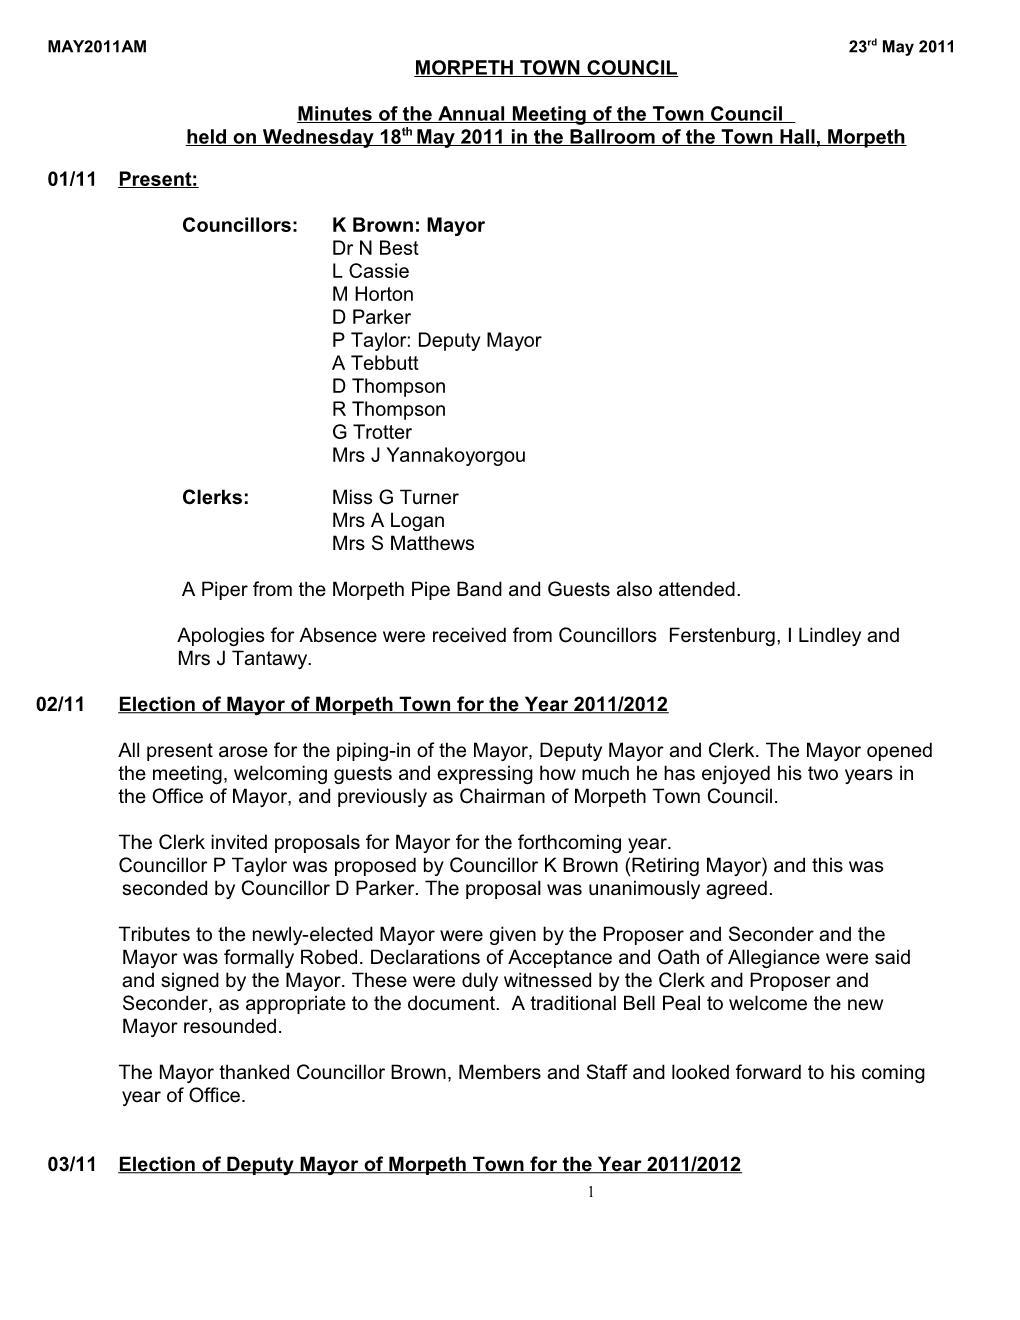 Minutes of the Annual Meeting of the Town Council